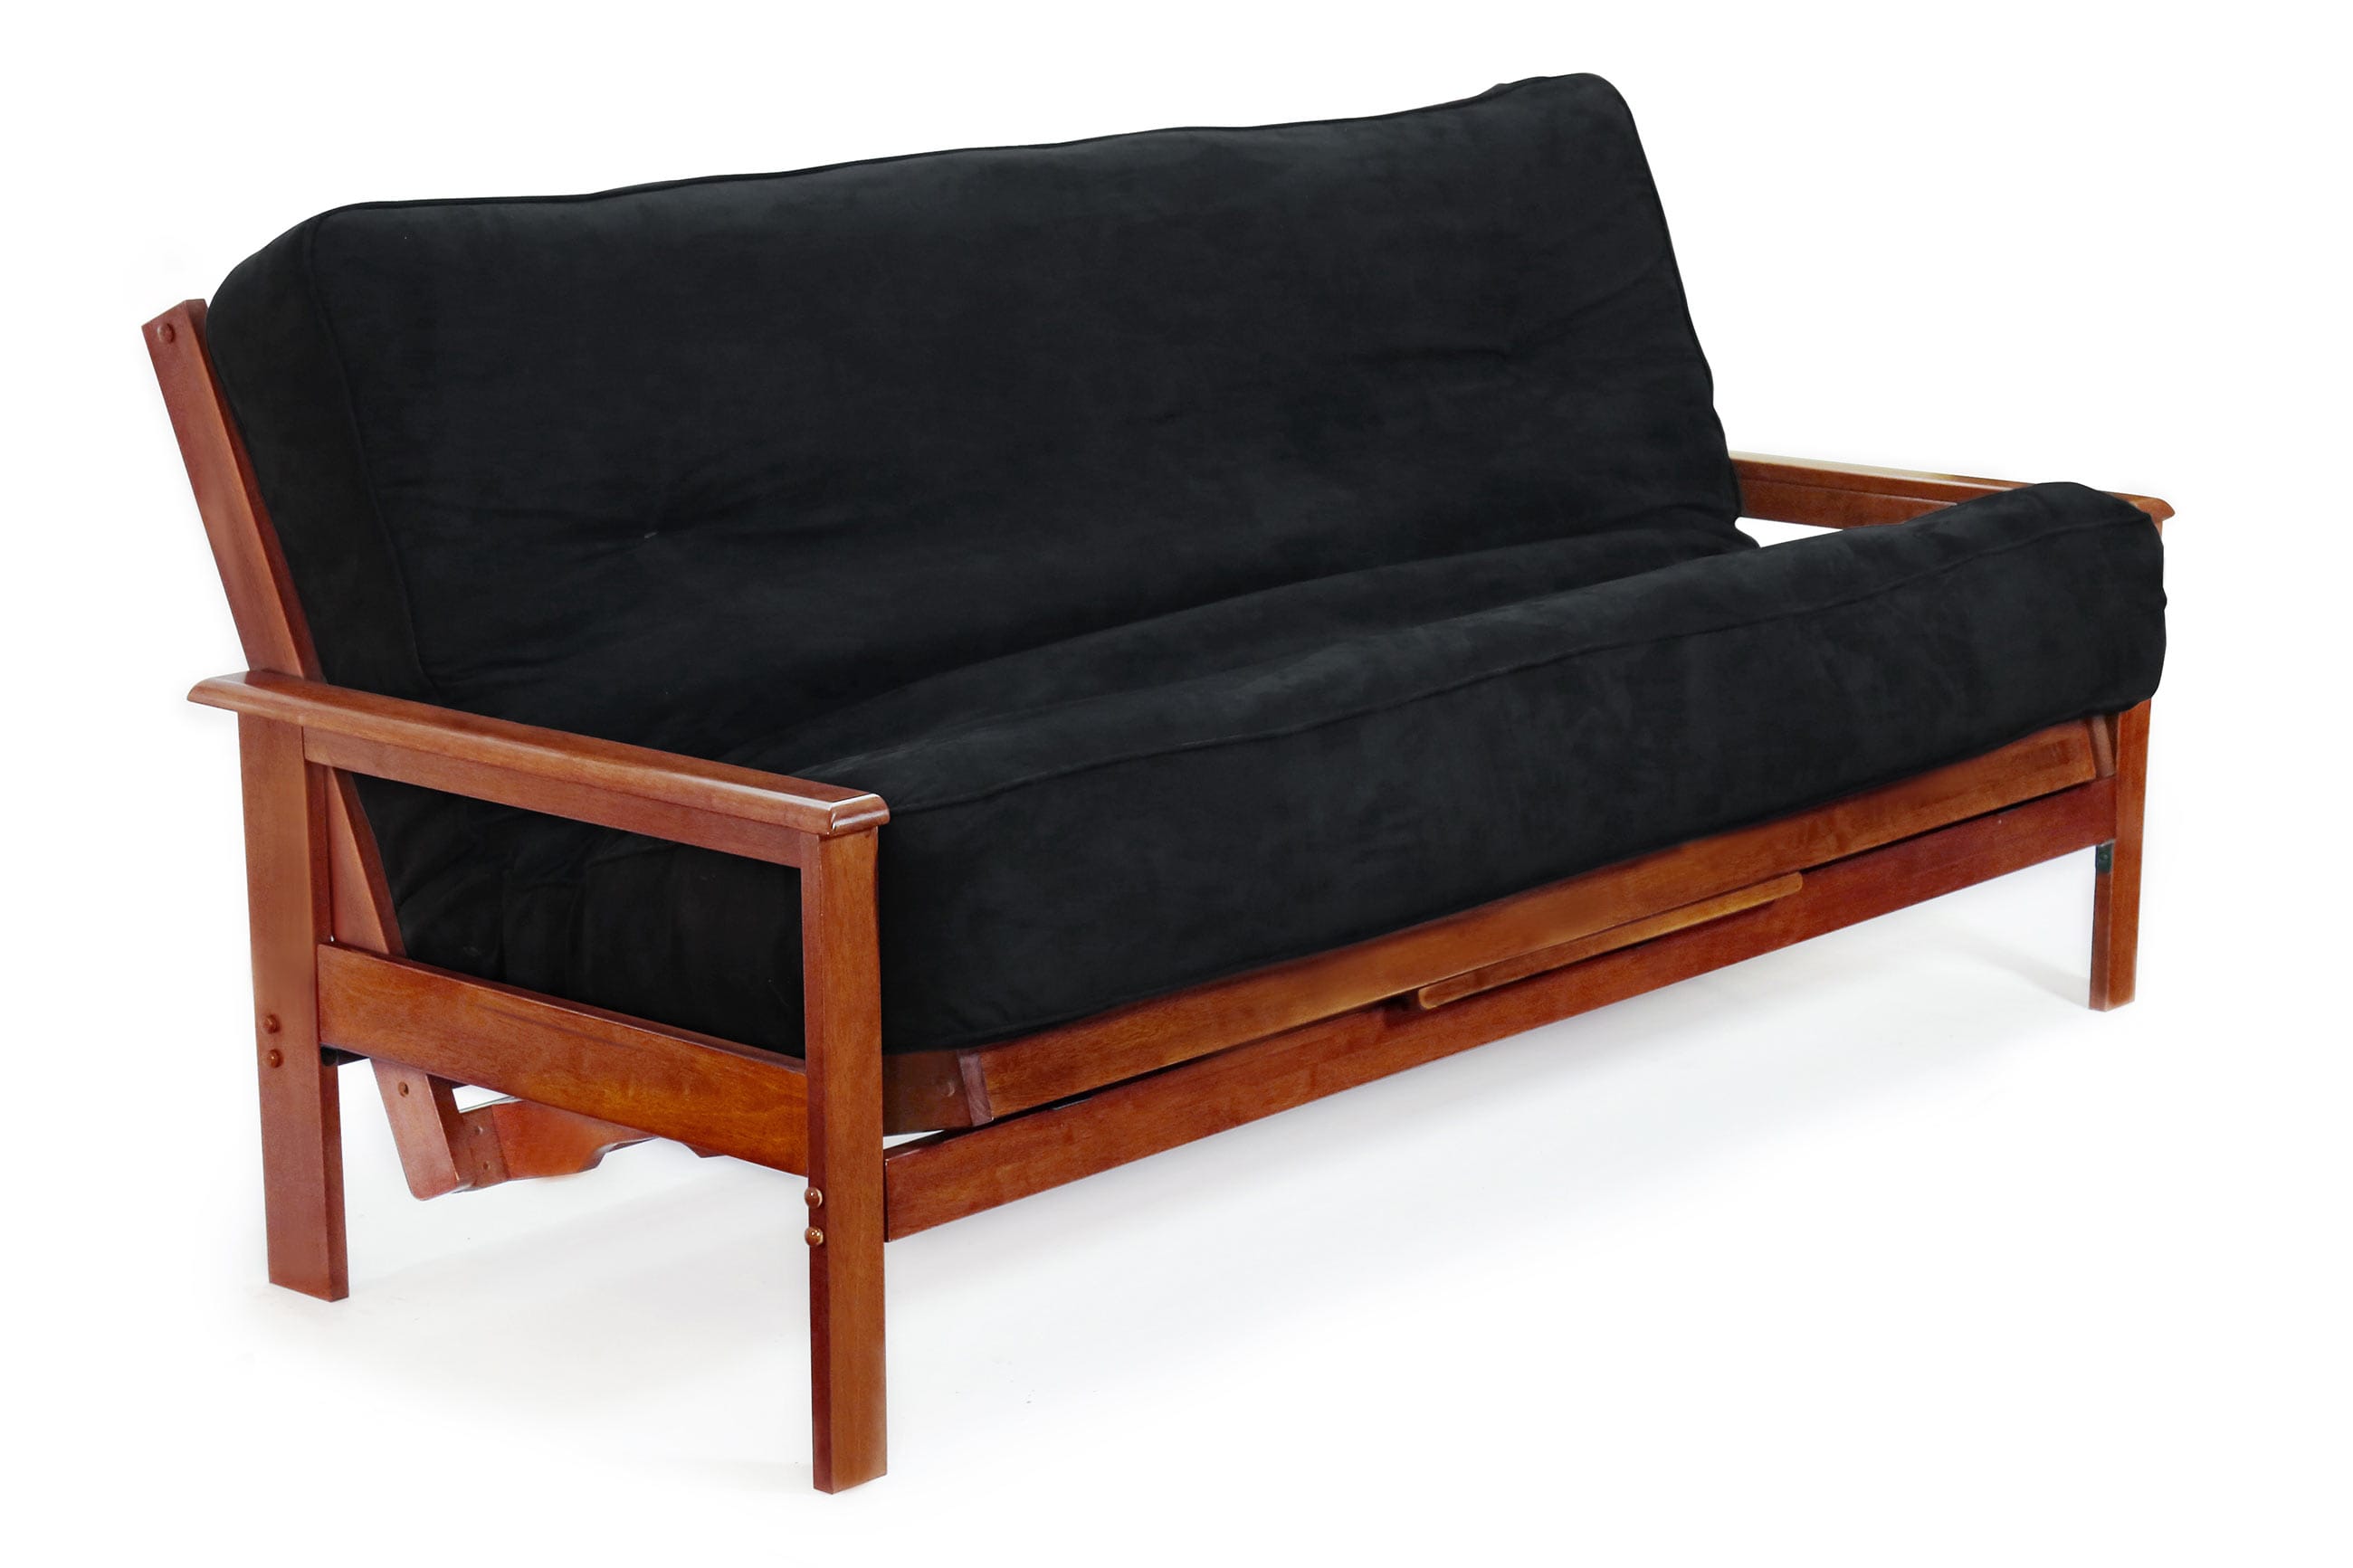 Albany Futon Frame By Night Day Furniture